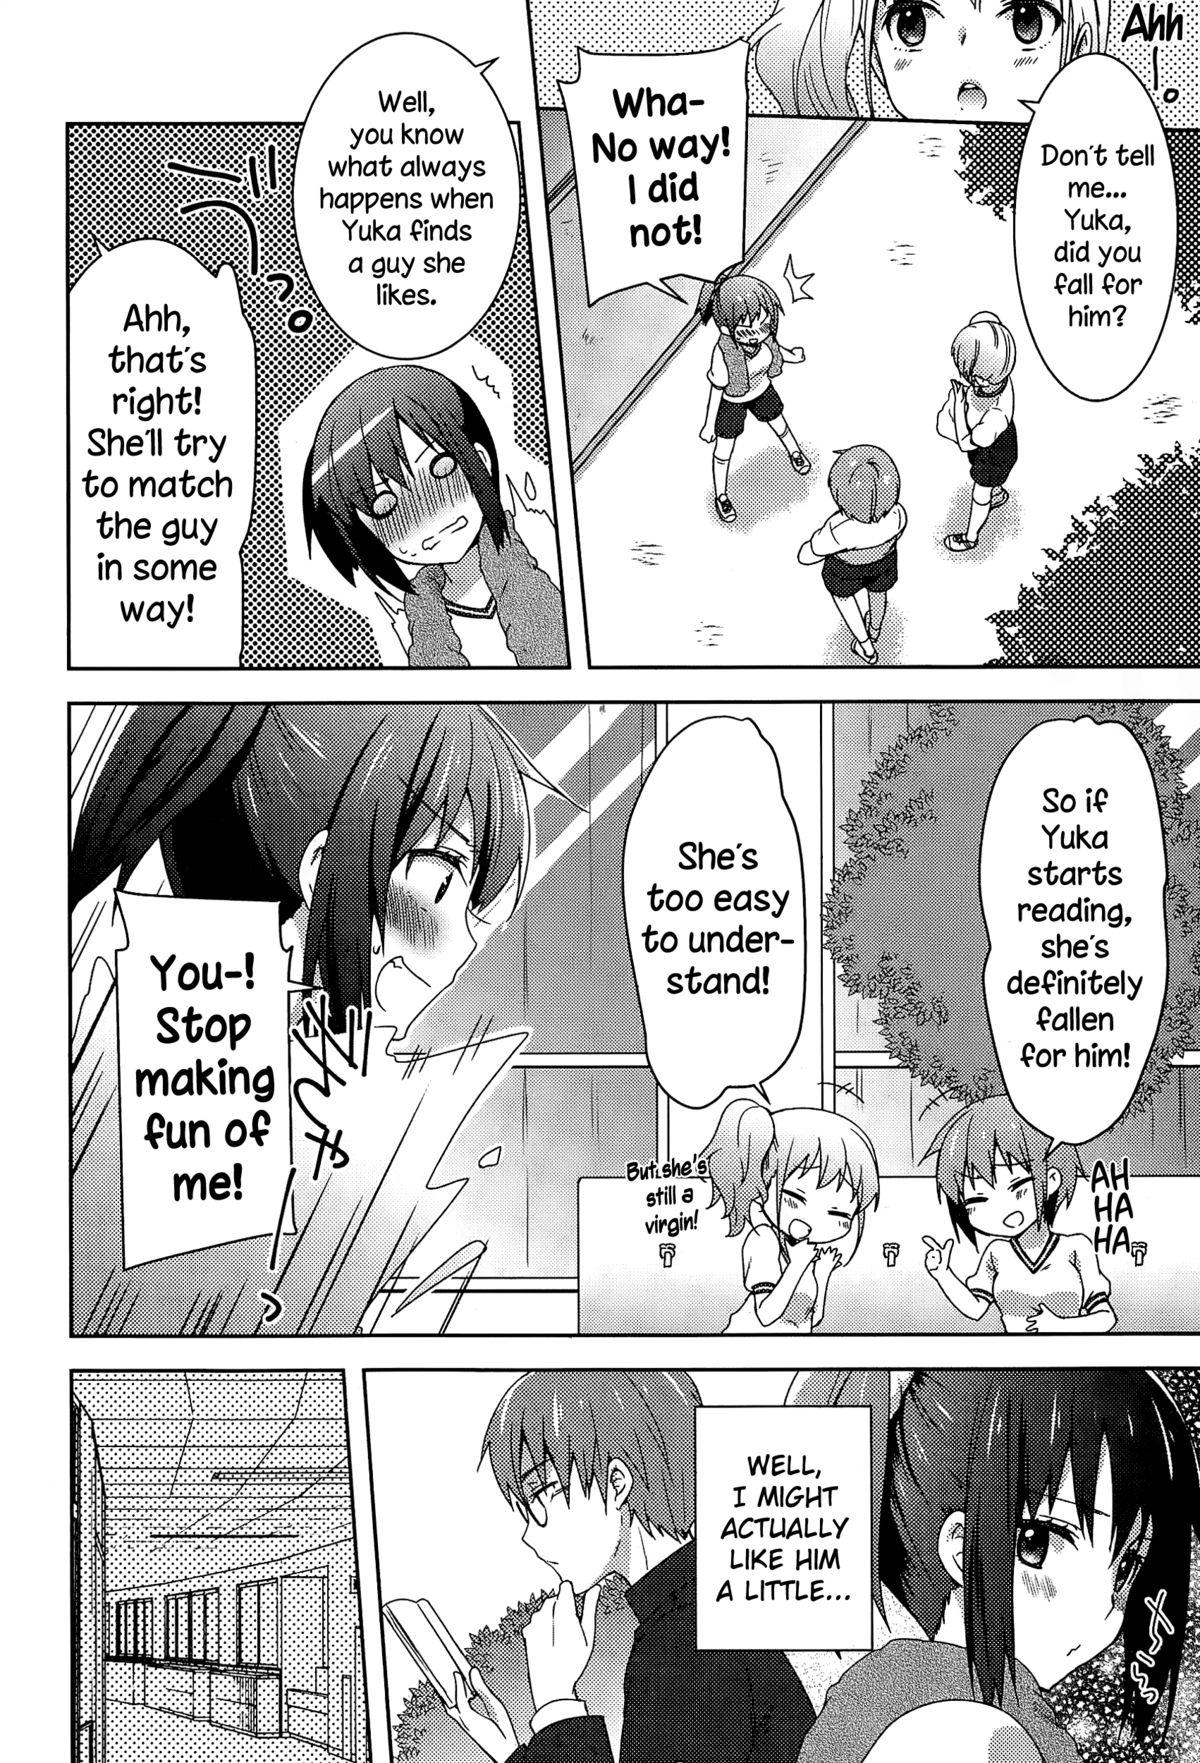 Friends Houkago Spats Club - Page 2